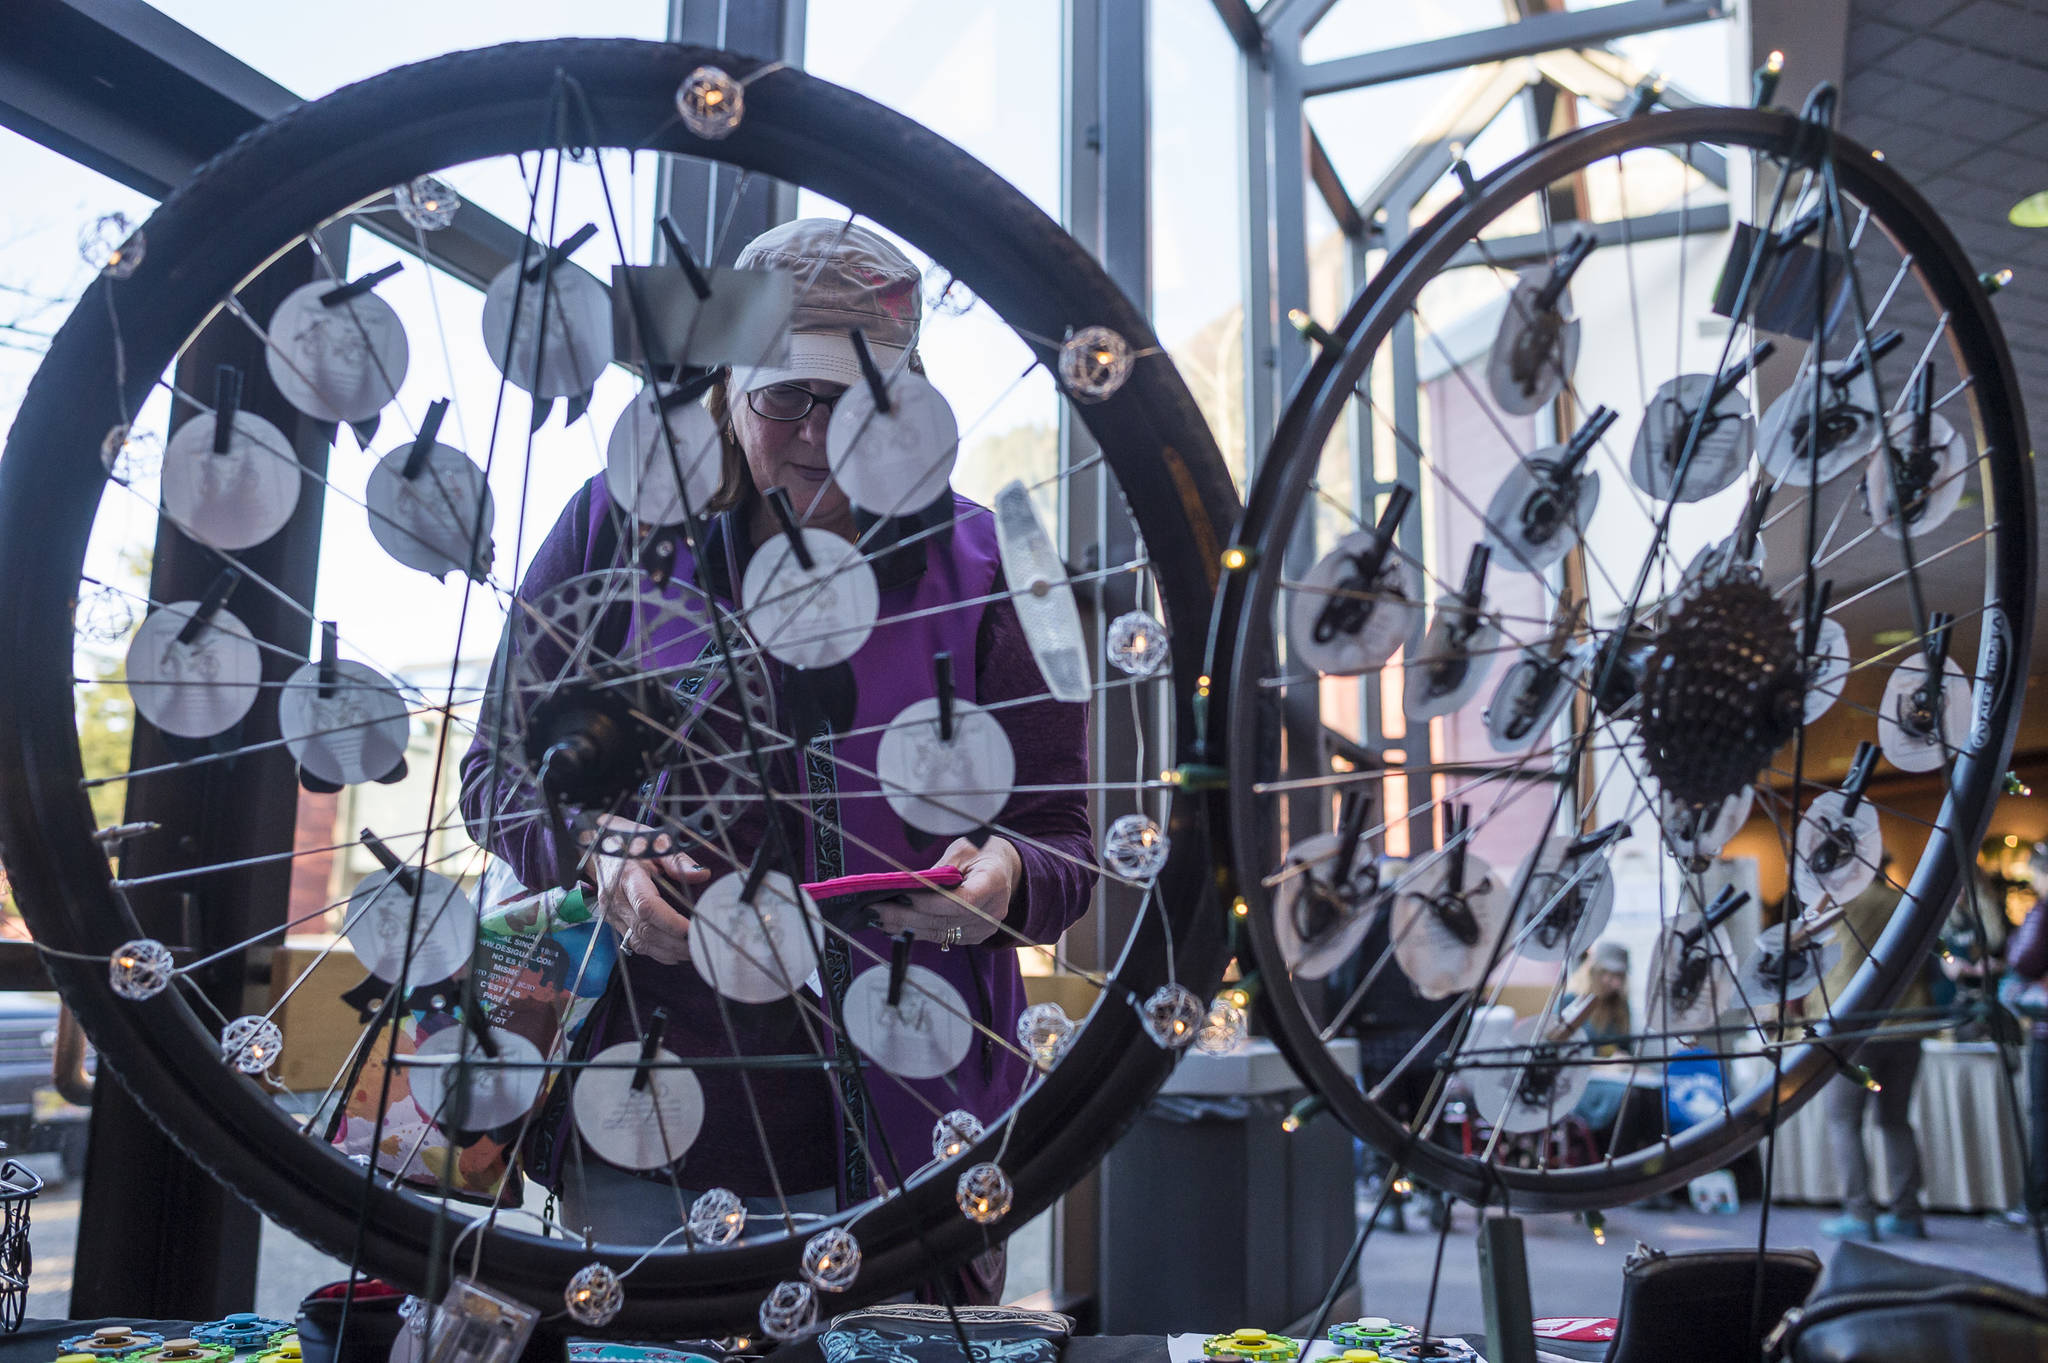 Timi Tullis looks at jewelry made of bicycle parts by Deb Winkelman at the Public Market in Centennial Hall on Friday, Nov. 23, 2018. (Michael Penn | Juneau Empire)